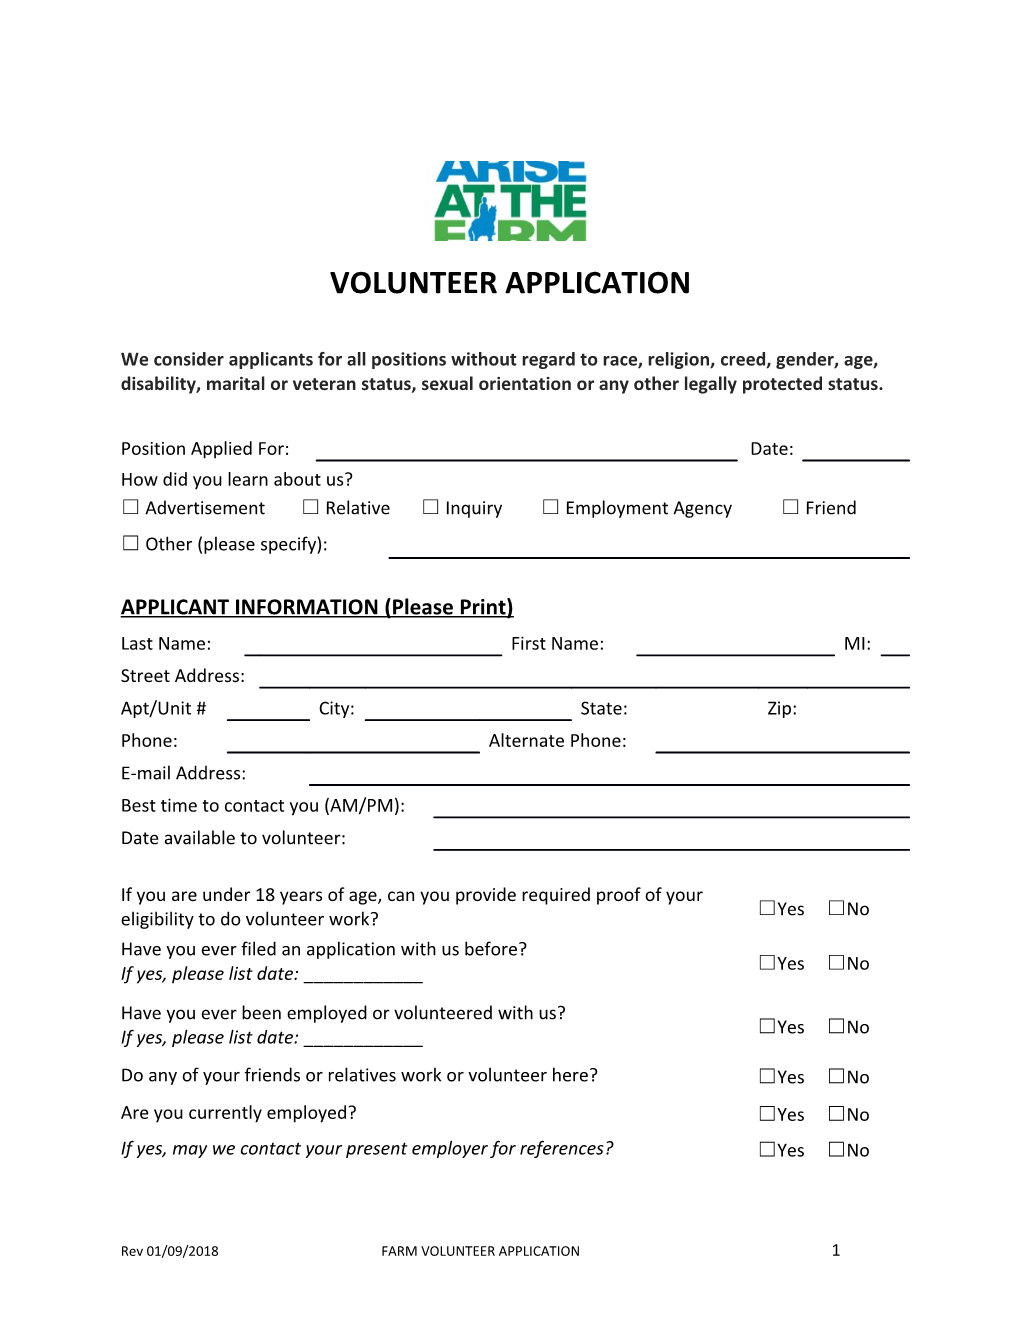 APPLICANT INFORMATION (Please Print)